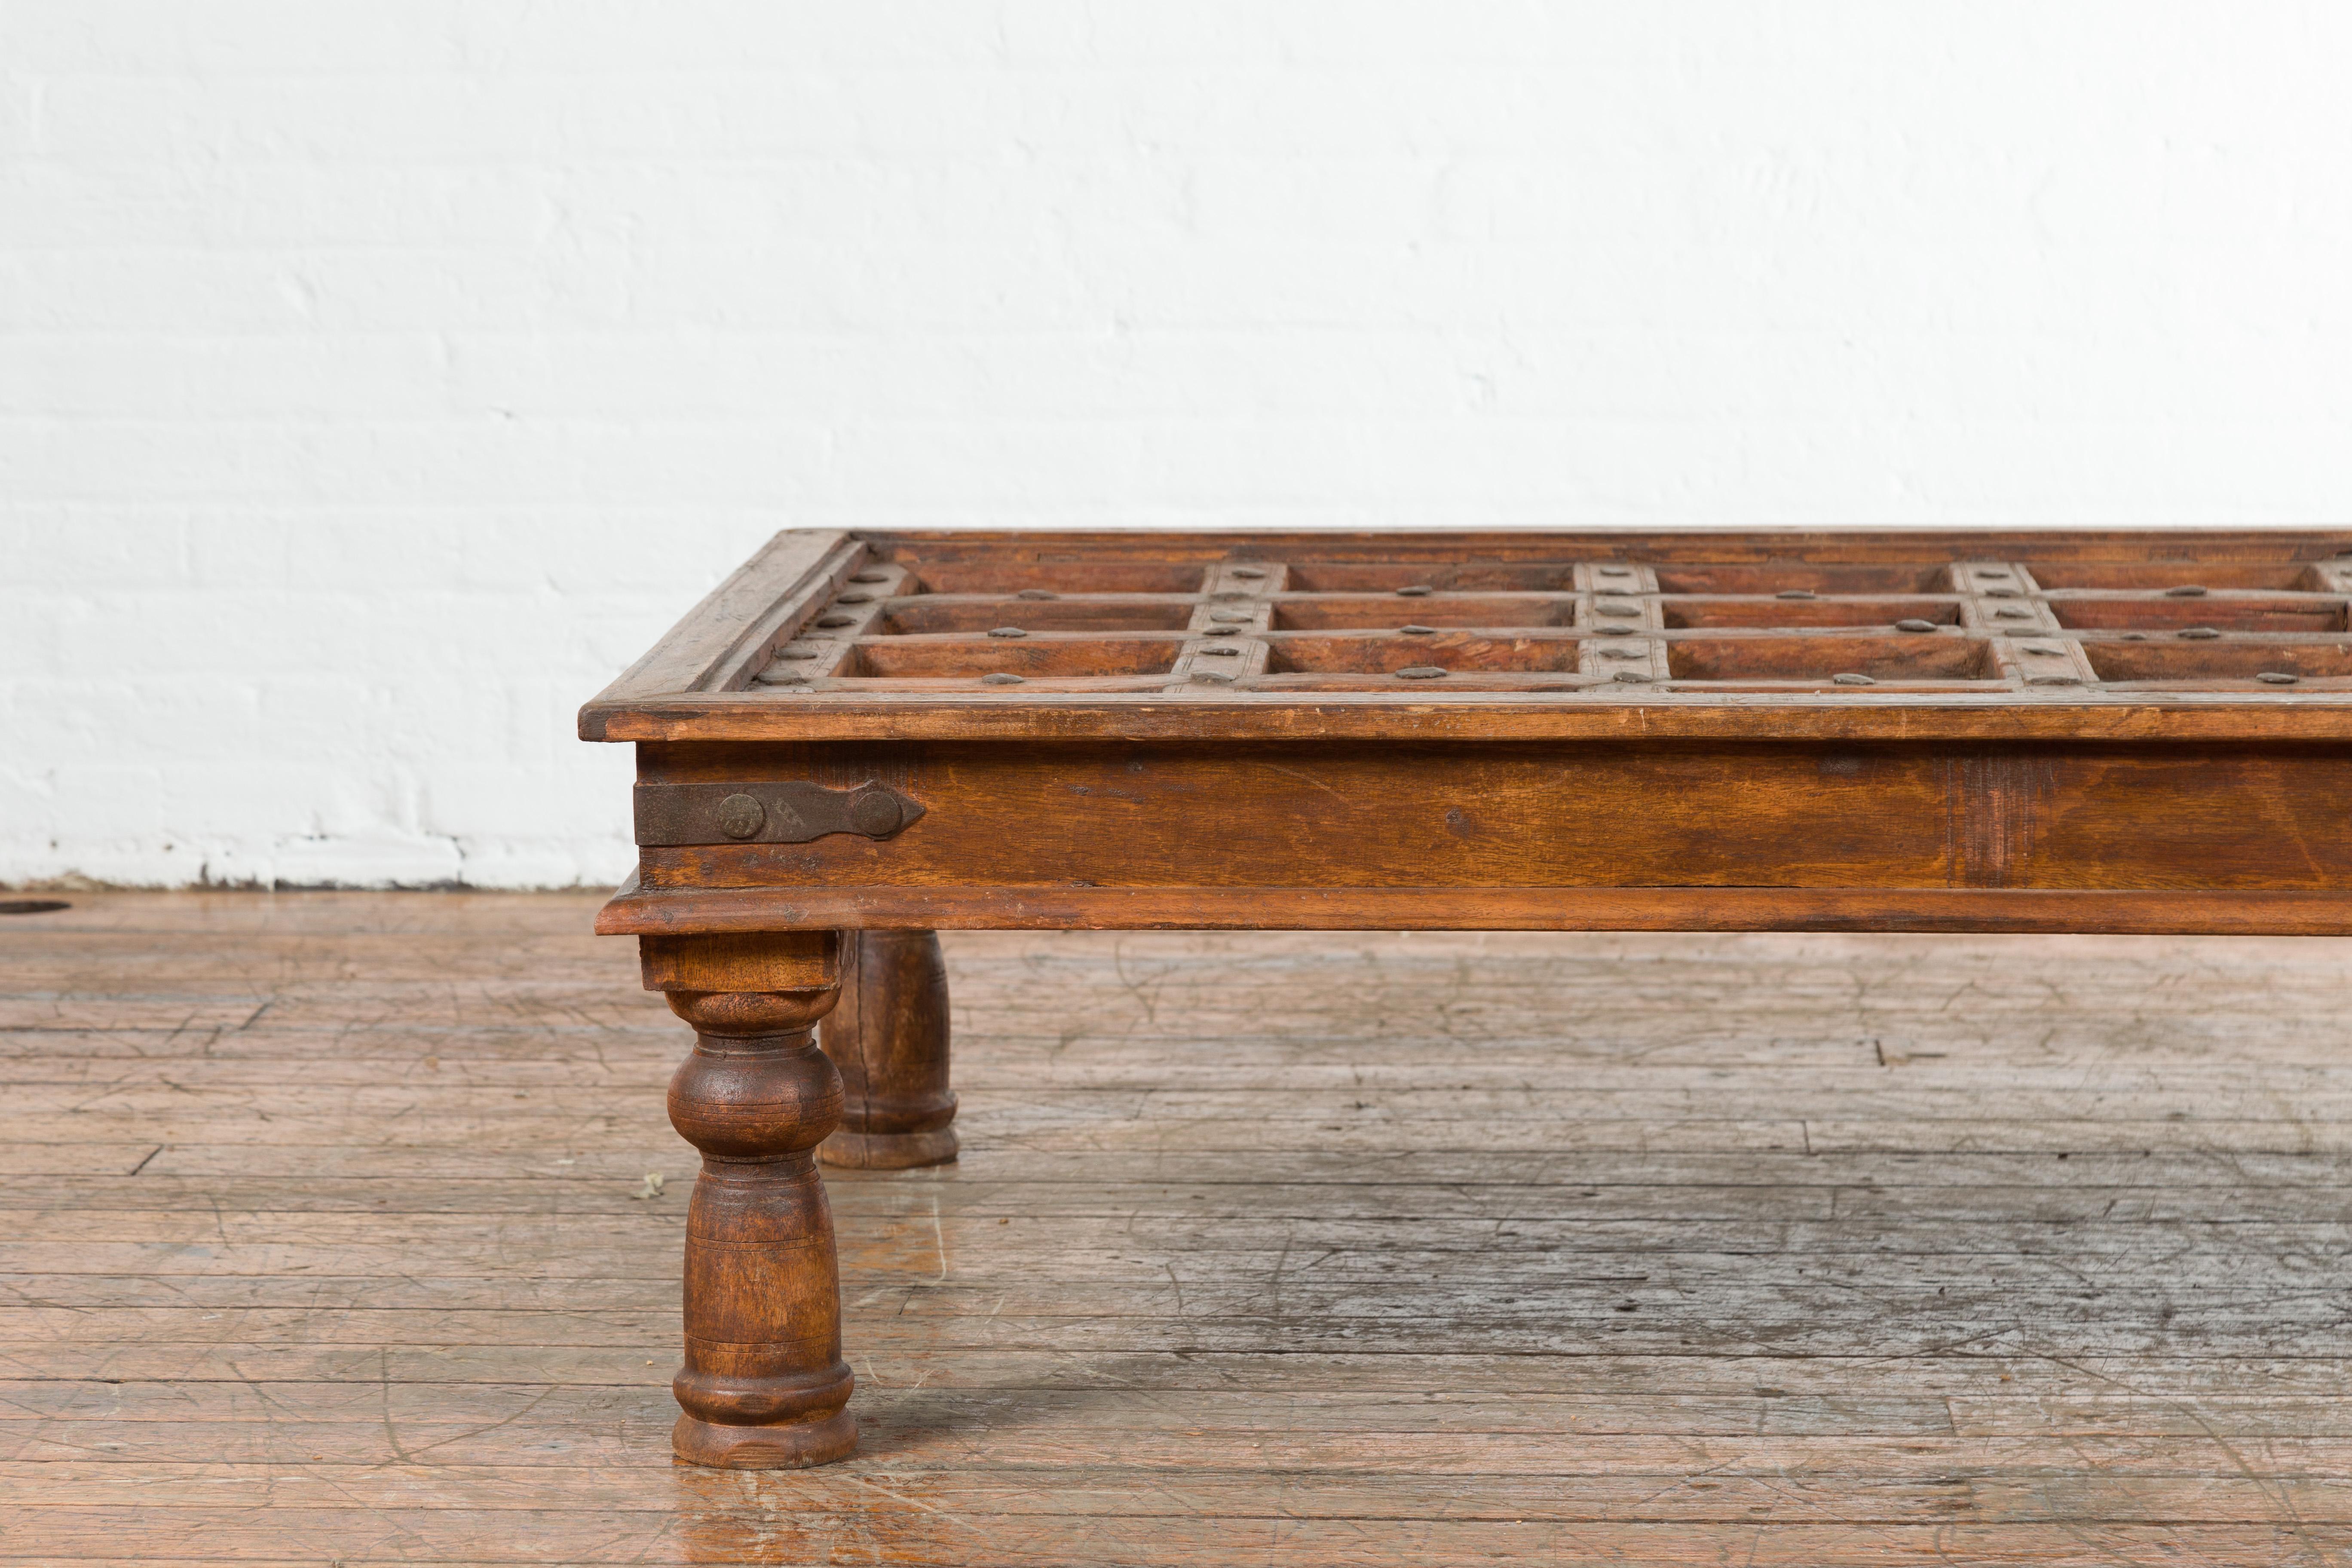 Indian 19th Century Paneled Door with Iron Accents Turned into a Coffee Table 1